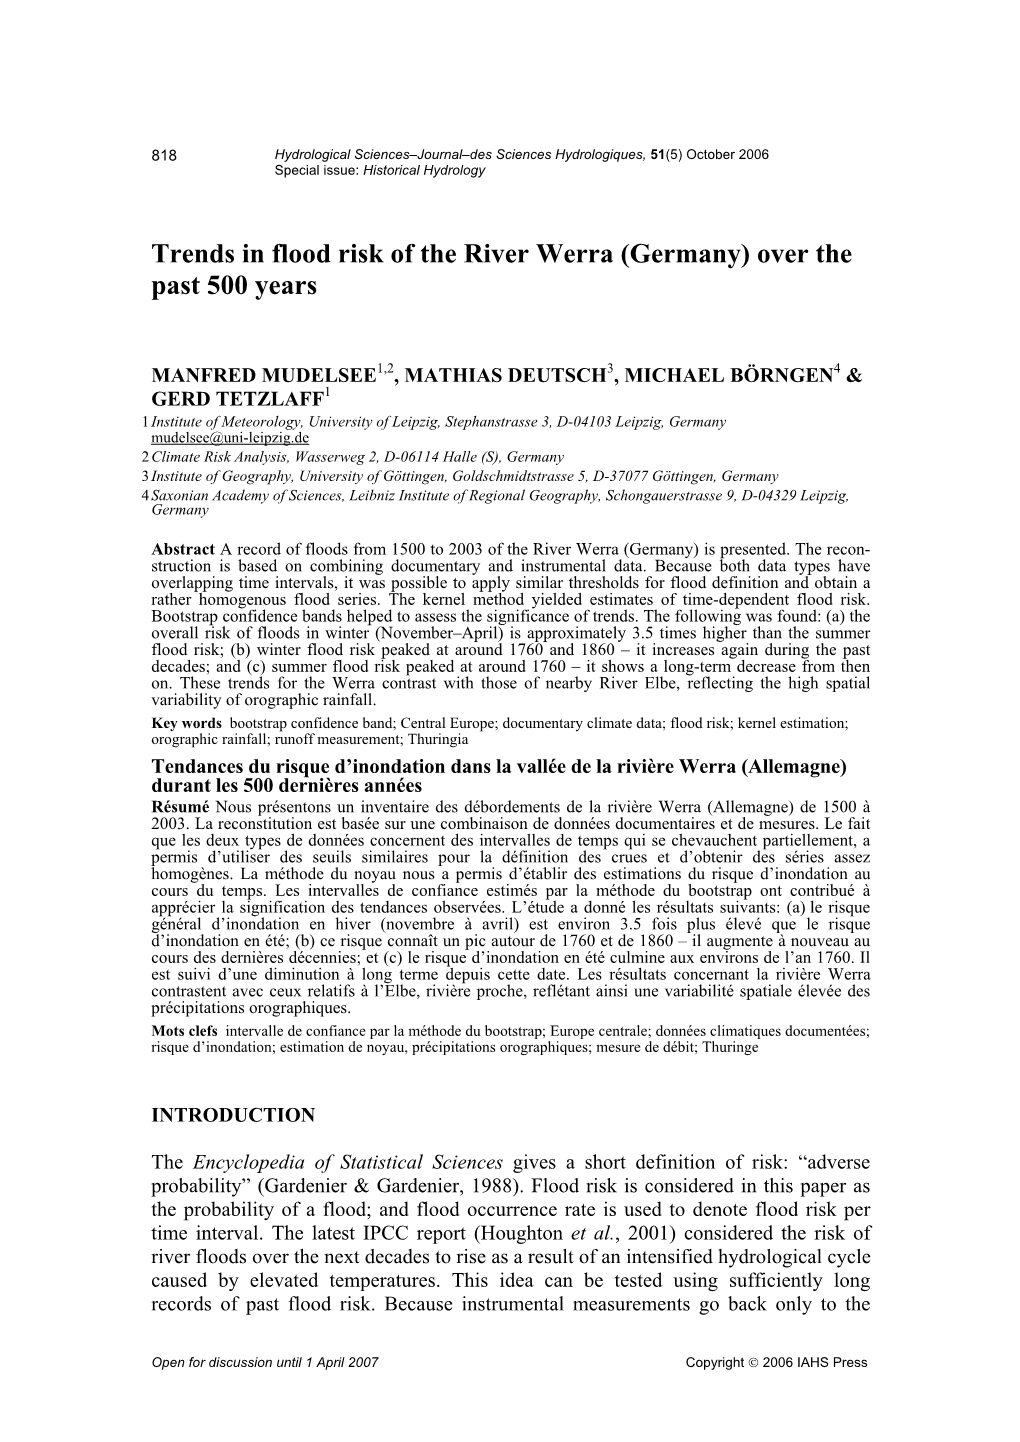 Trends in Flood Risk of the River Werra (Germany) Over the Past 500 Years